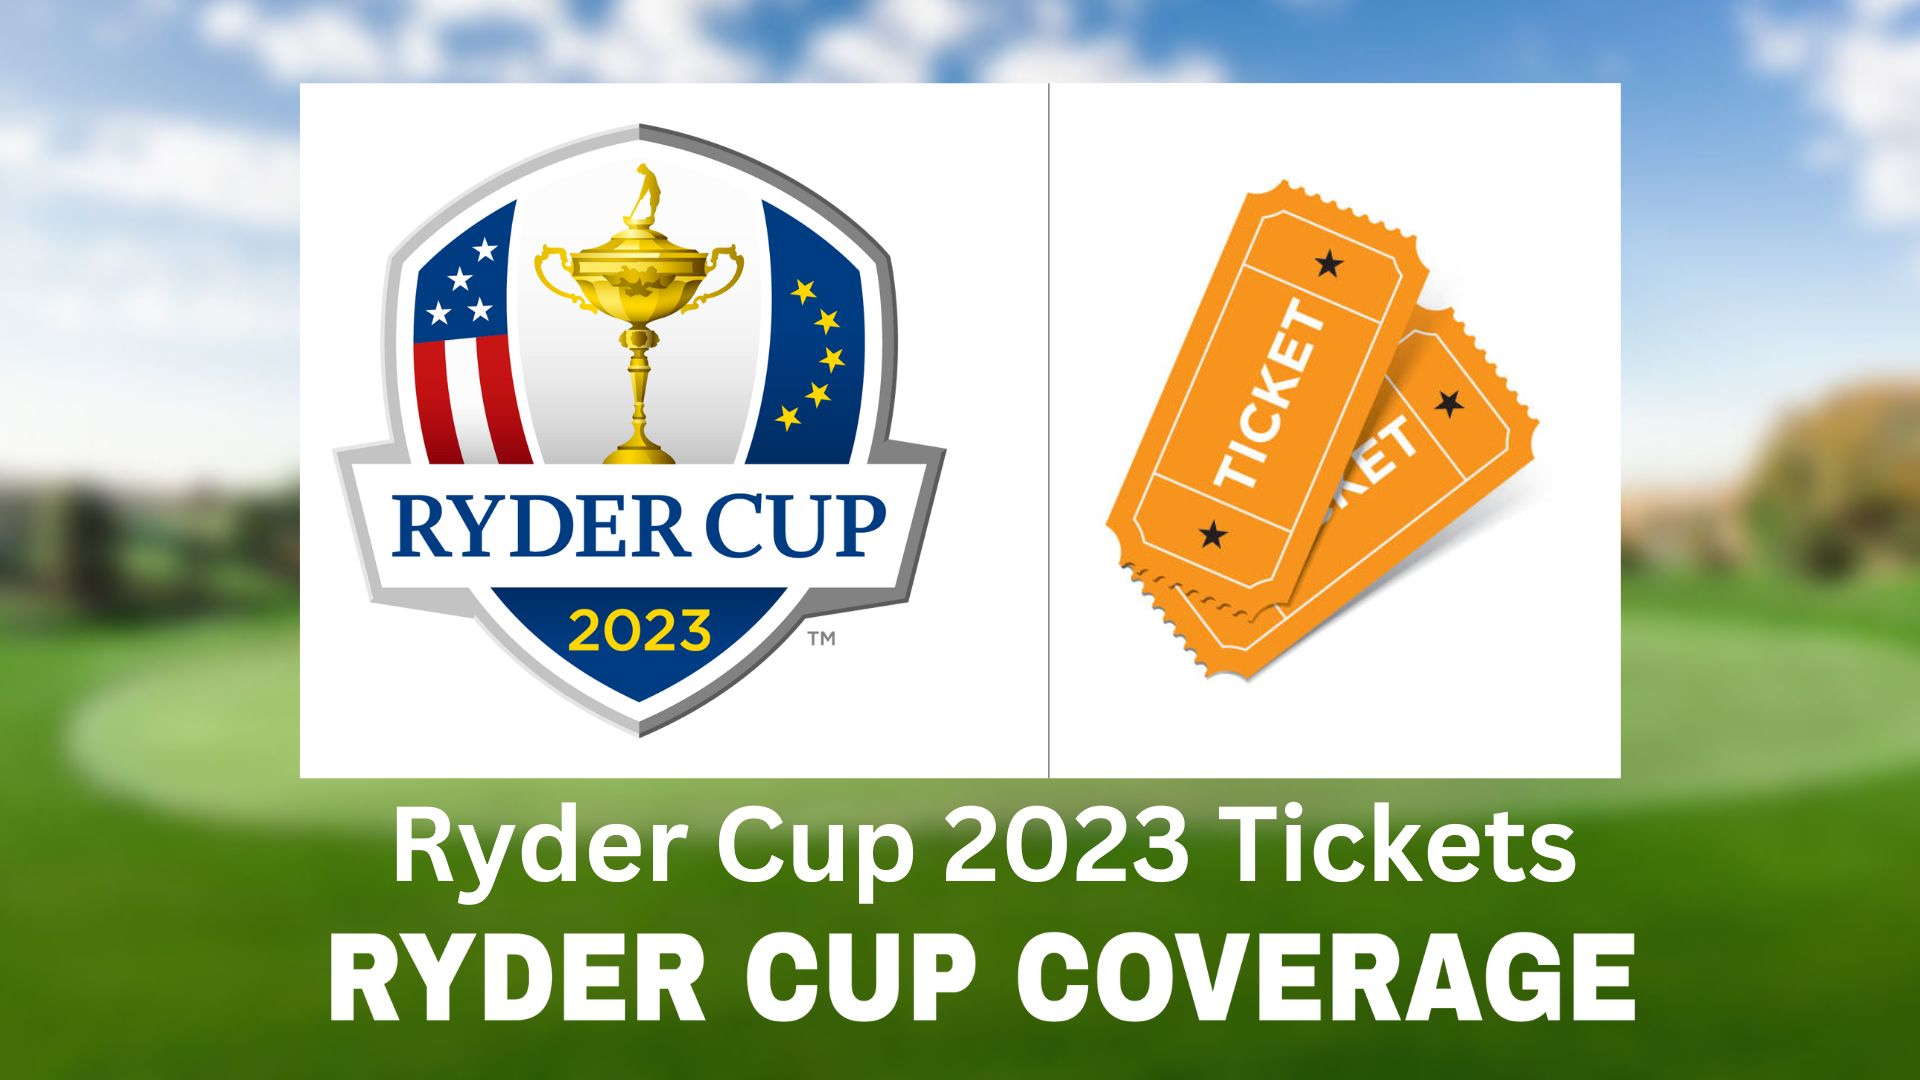 Ryder Cup 2023 Tickets